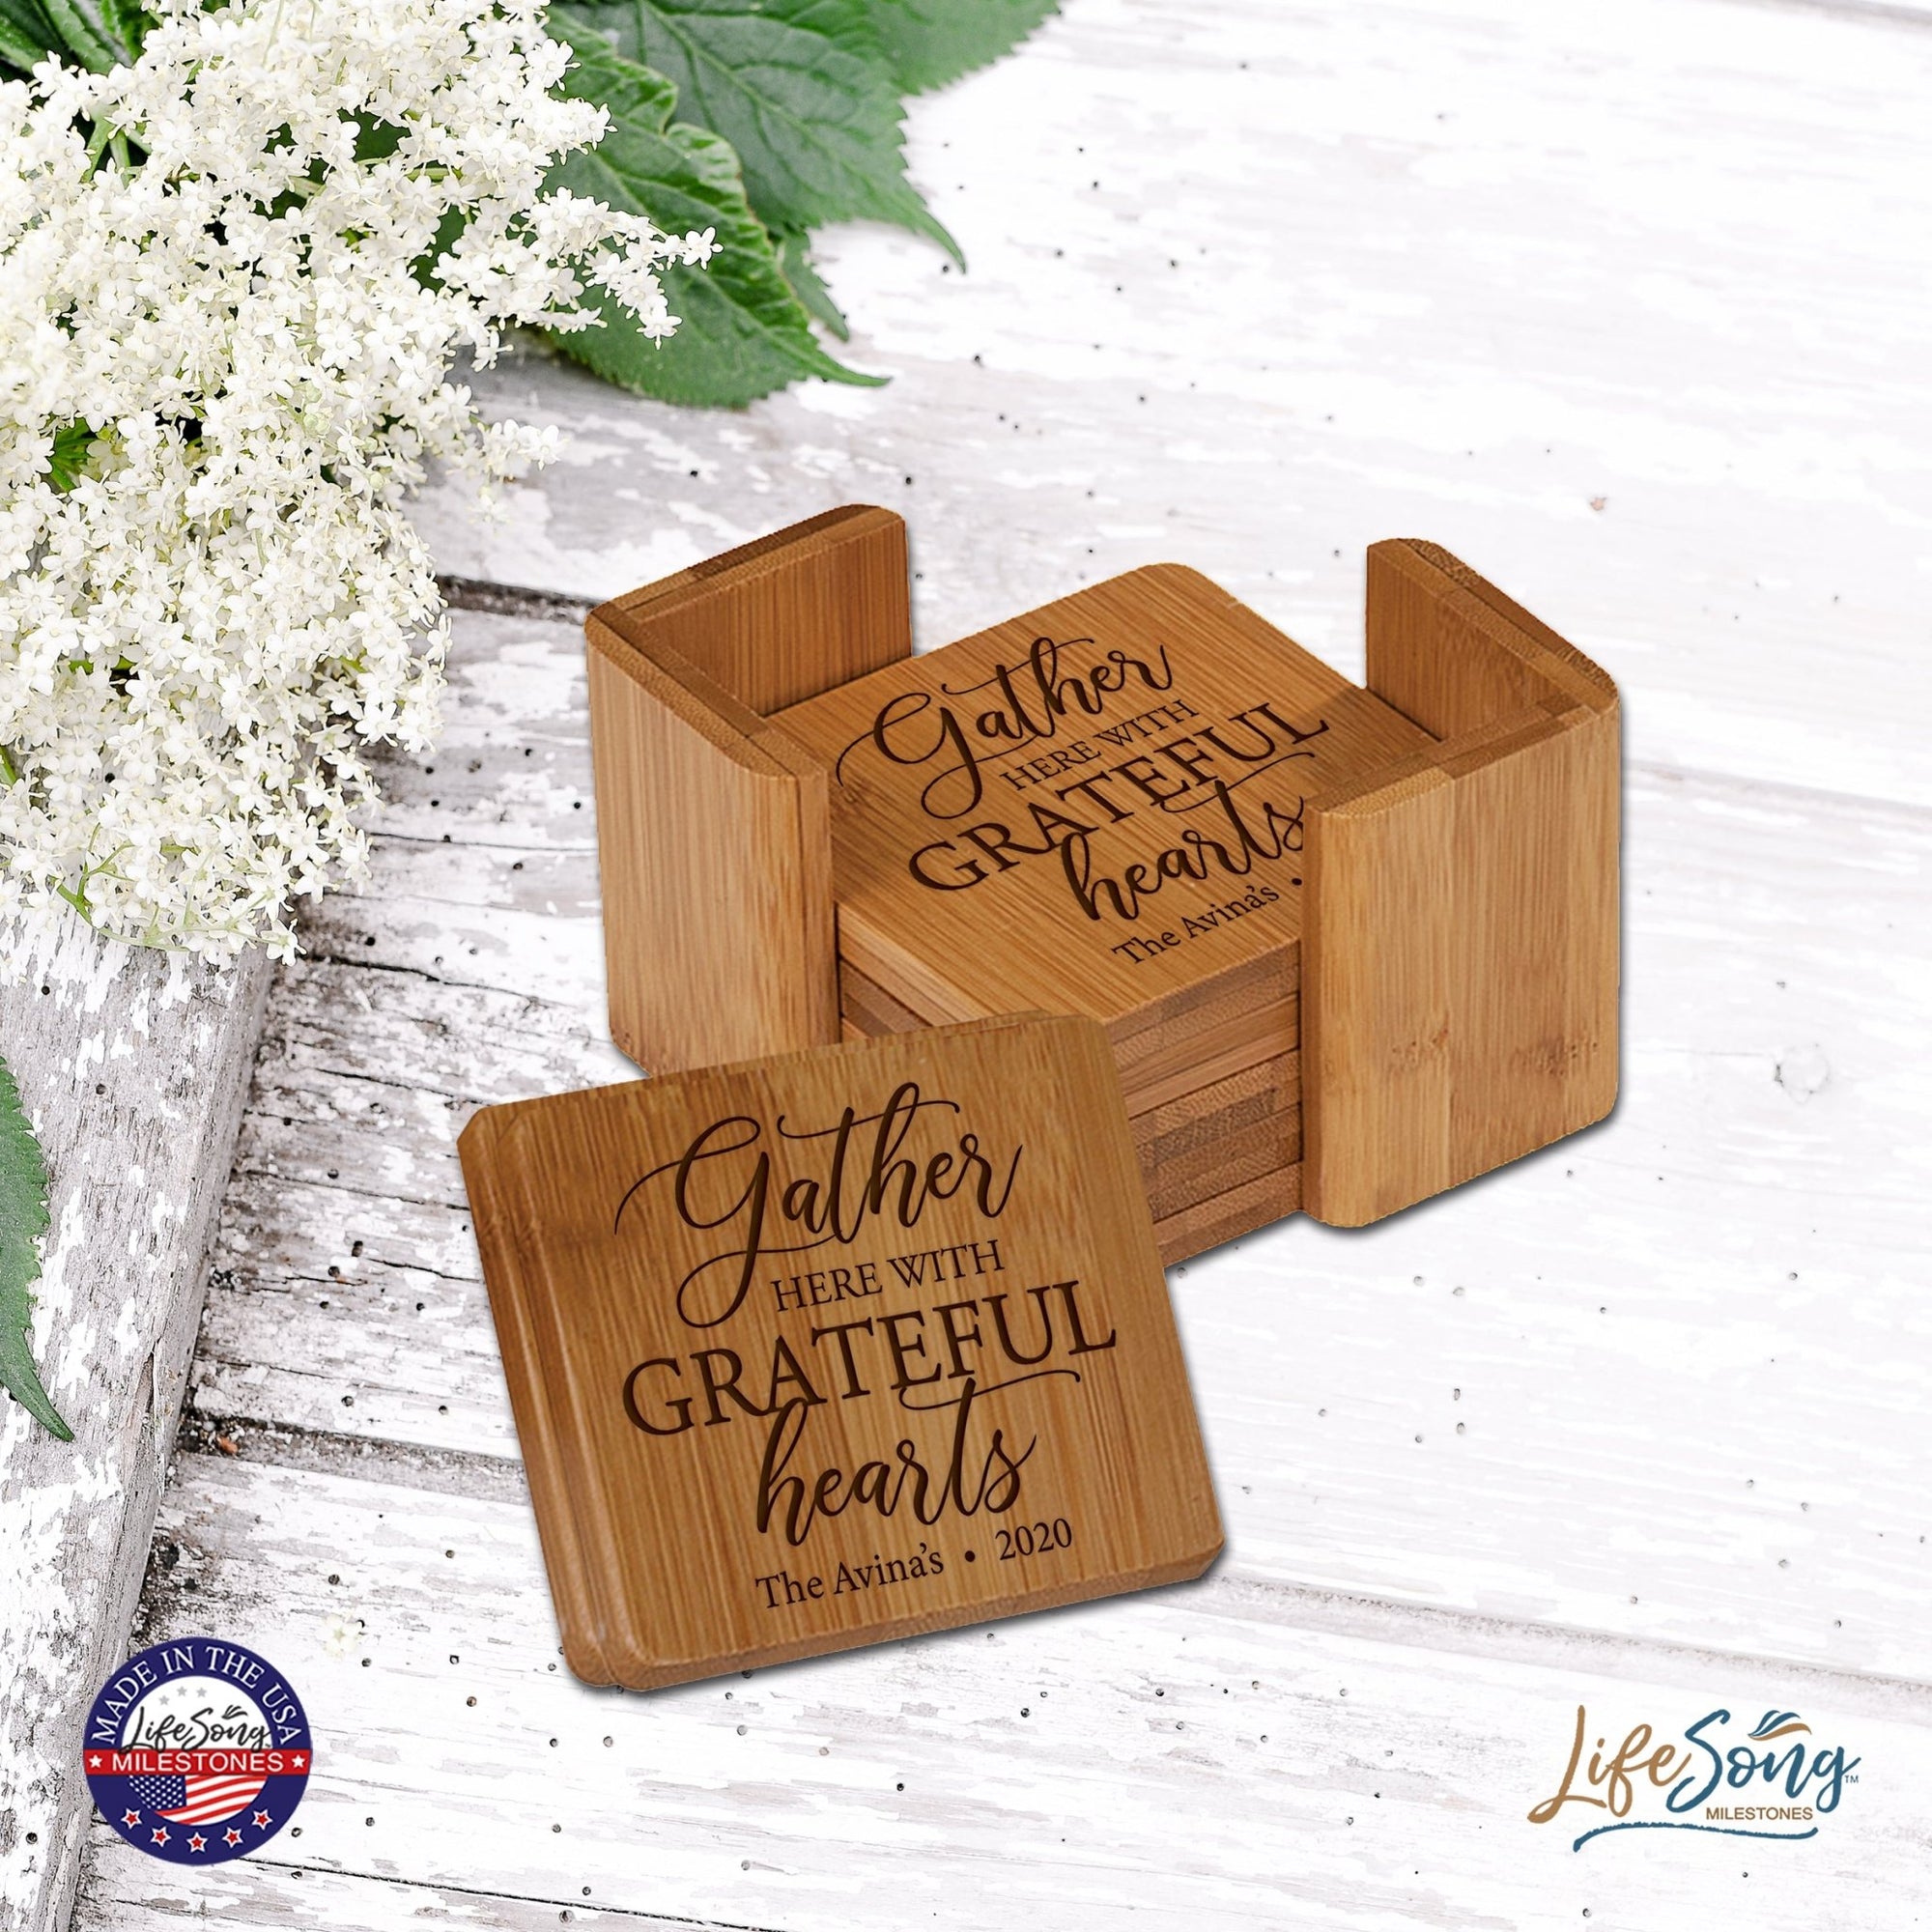 Personalized Family Home 6pc Solid Bamboo Coaster Set With Holder 4.5x4.5 – Gather Here With - LifeSong Milestones